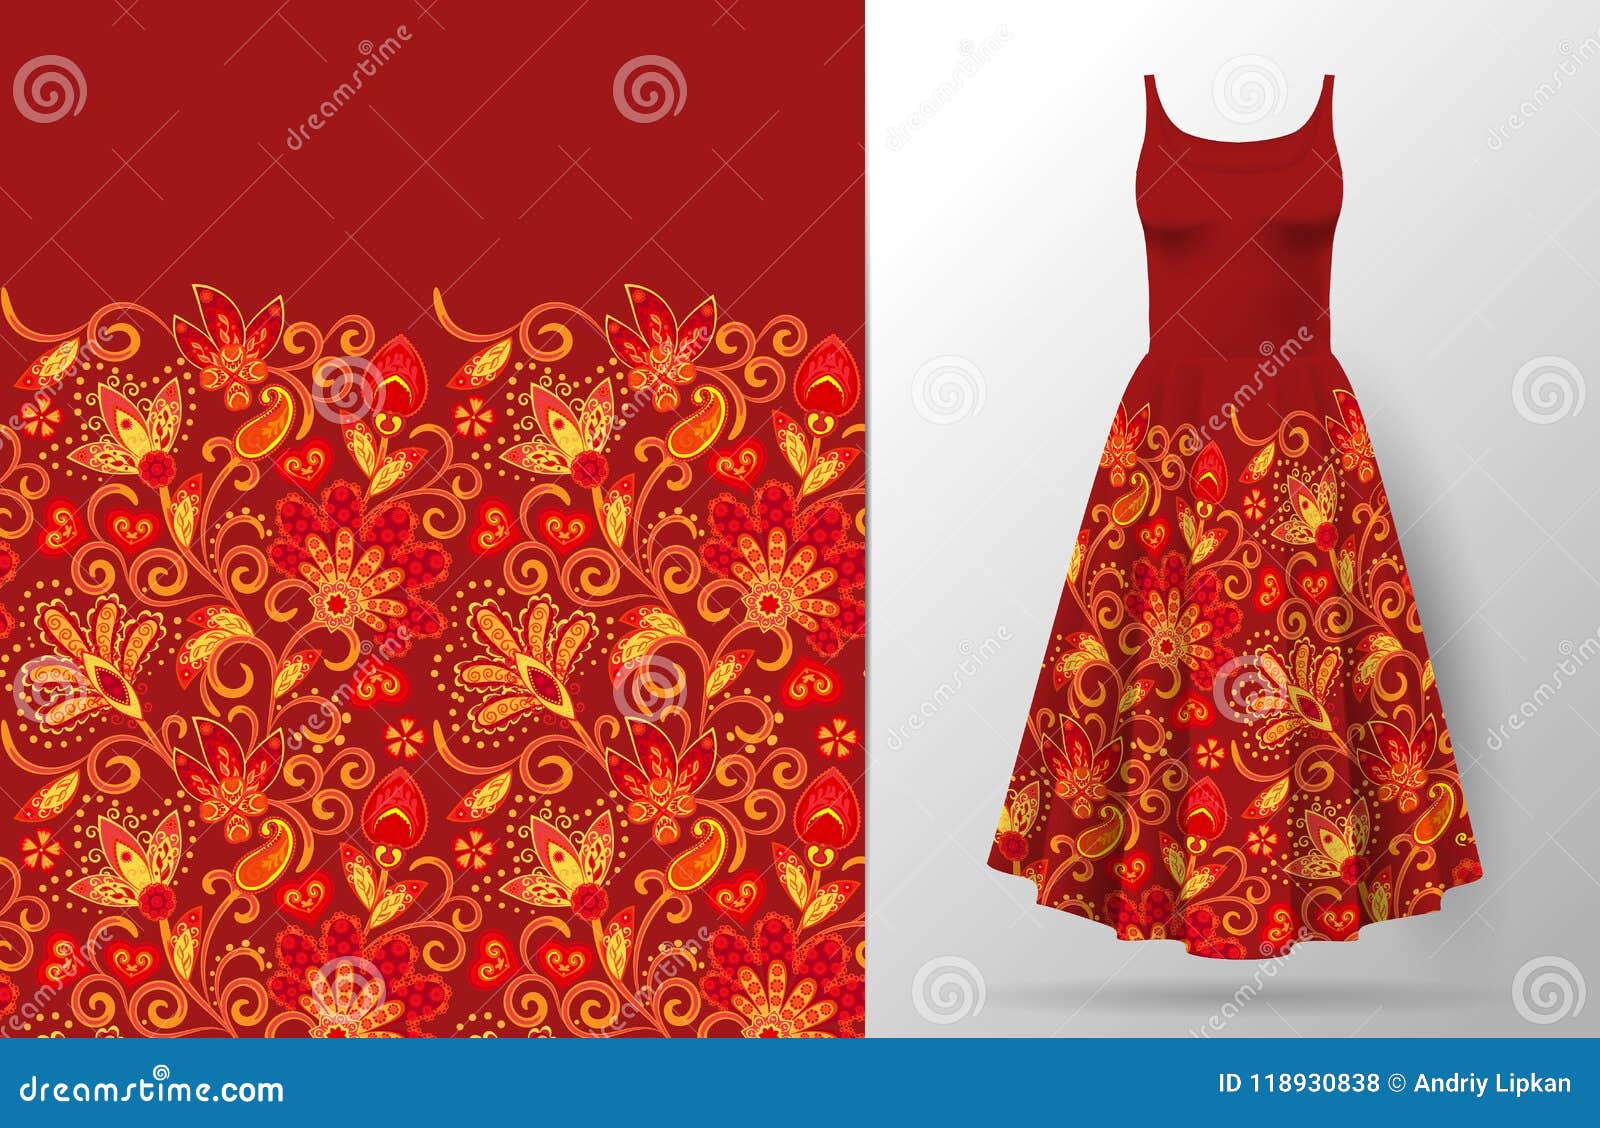 Download View Dress Mockup Vector Images Yellowimages - Free PSD ...